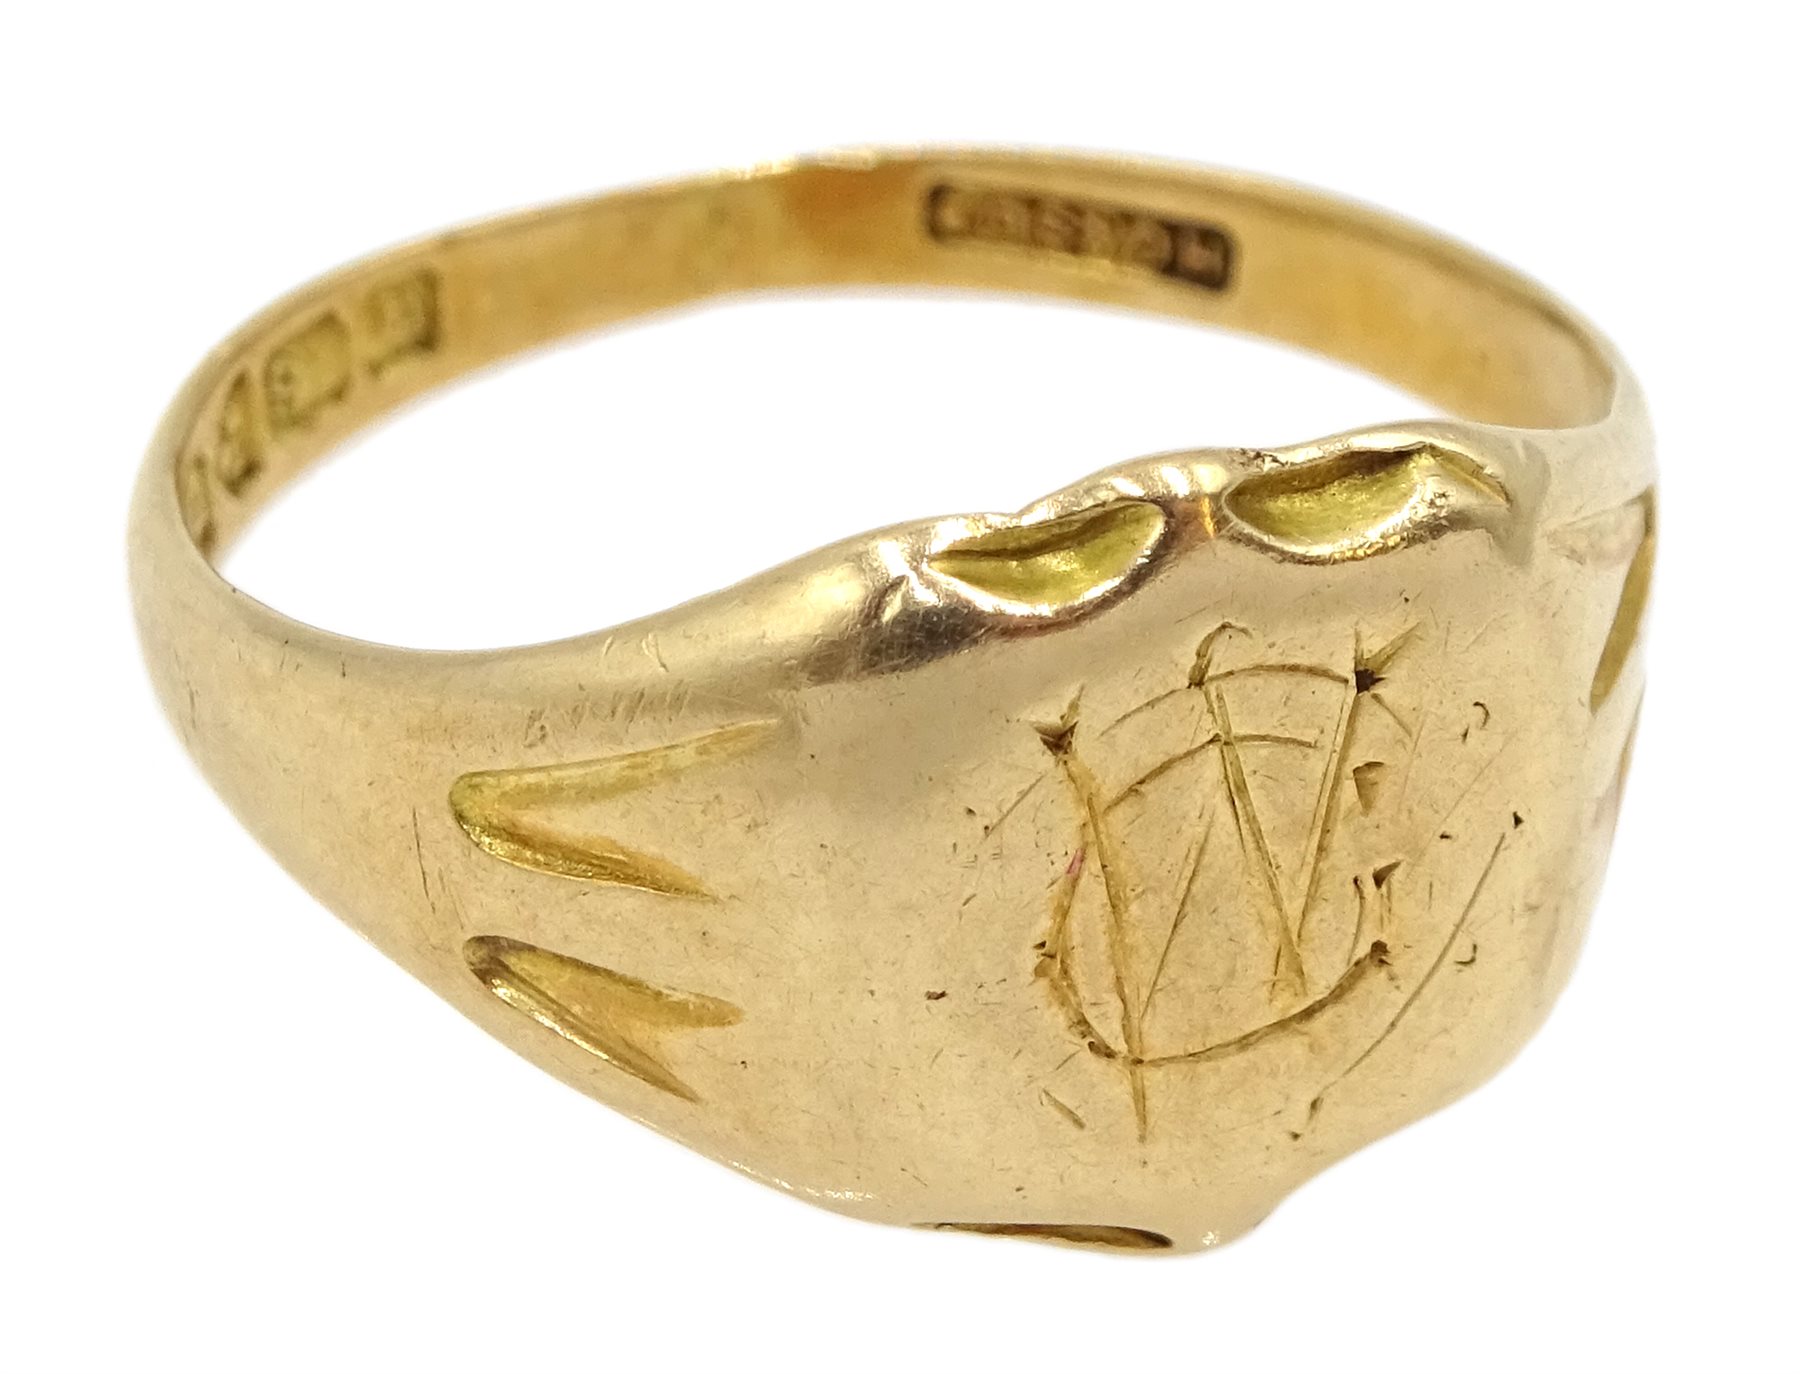 Edwardian 18ct gold signet ring, Chester 1909, approx 4.63gm - Image 2 of 5